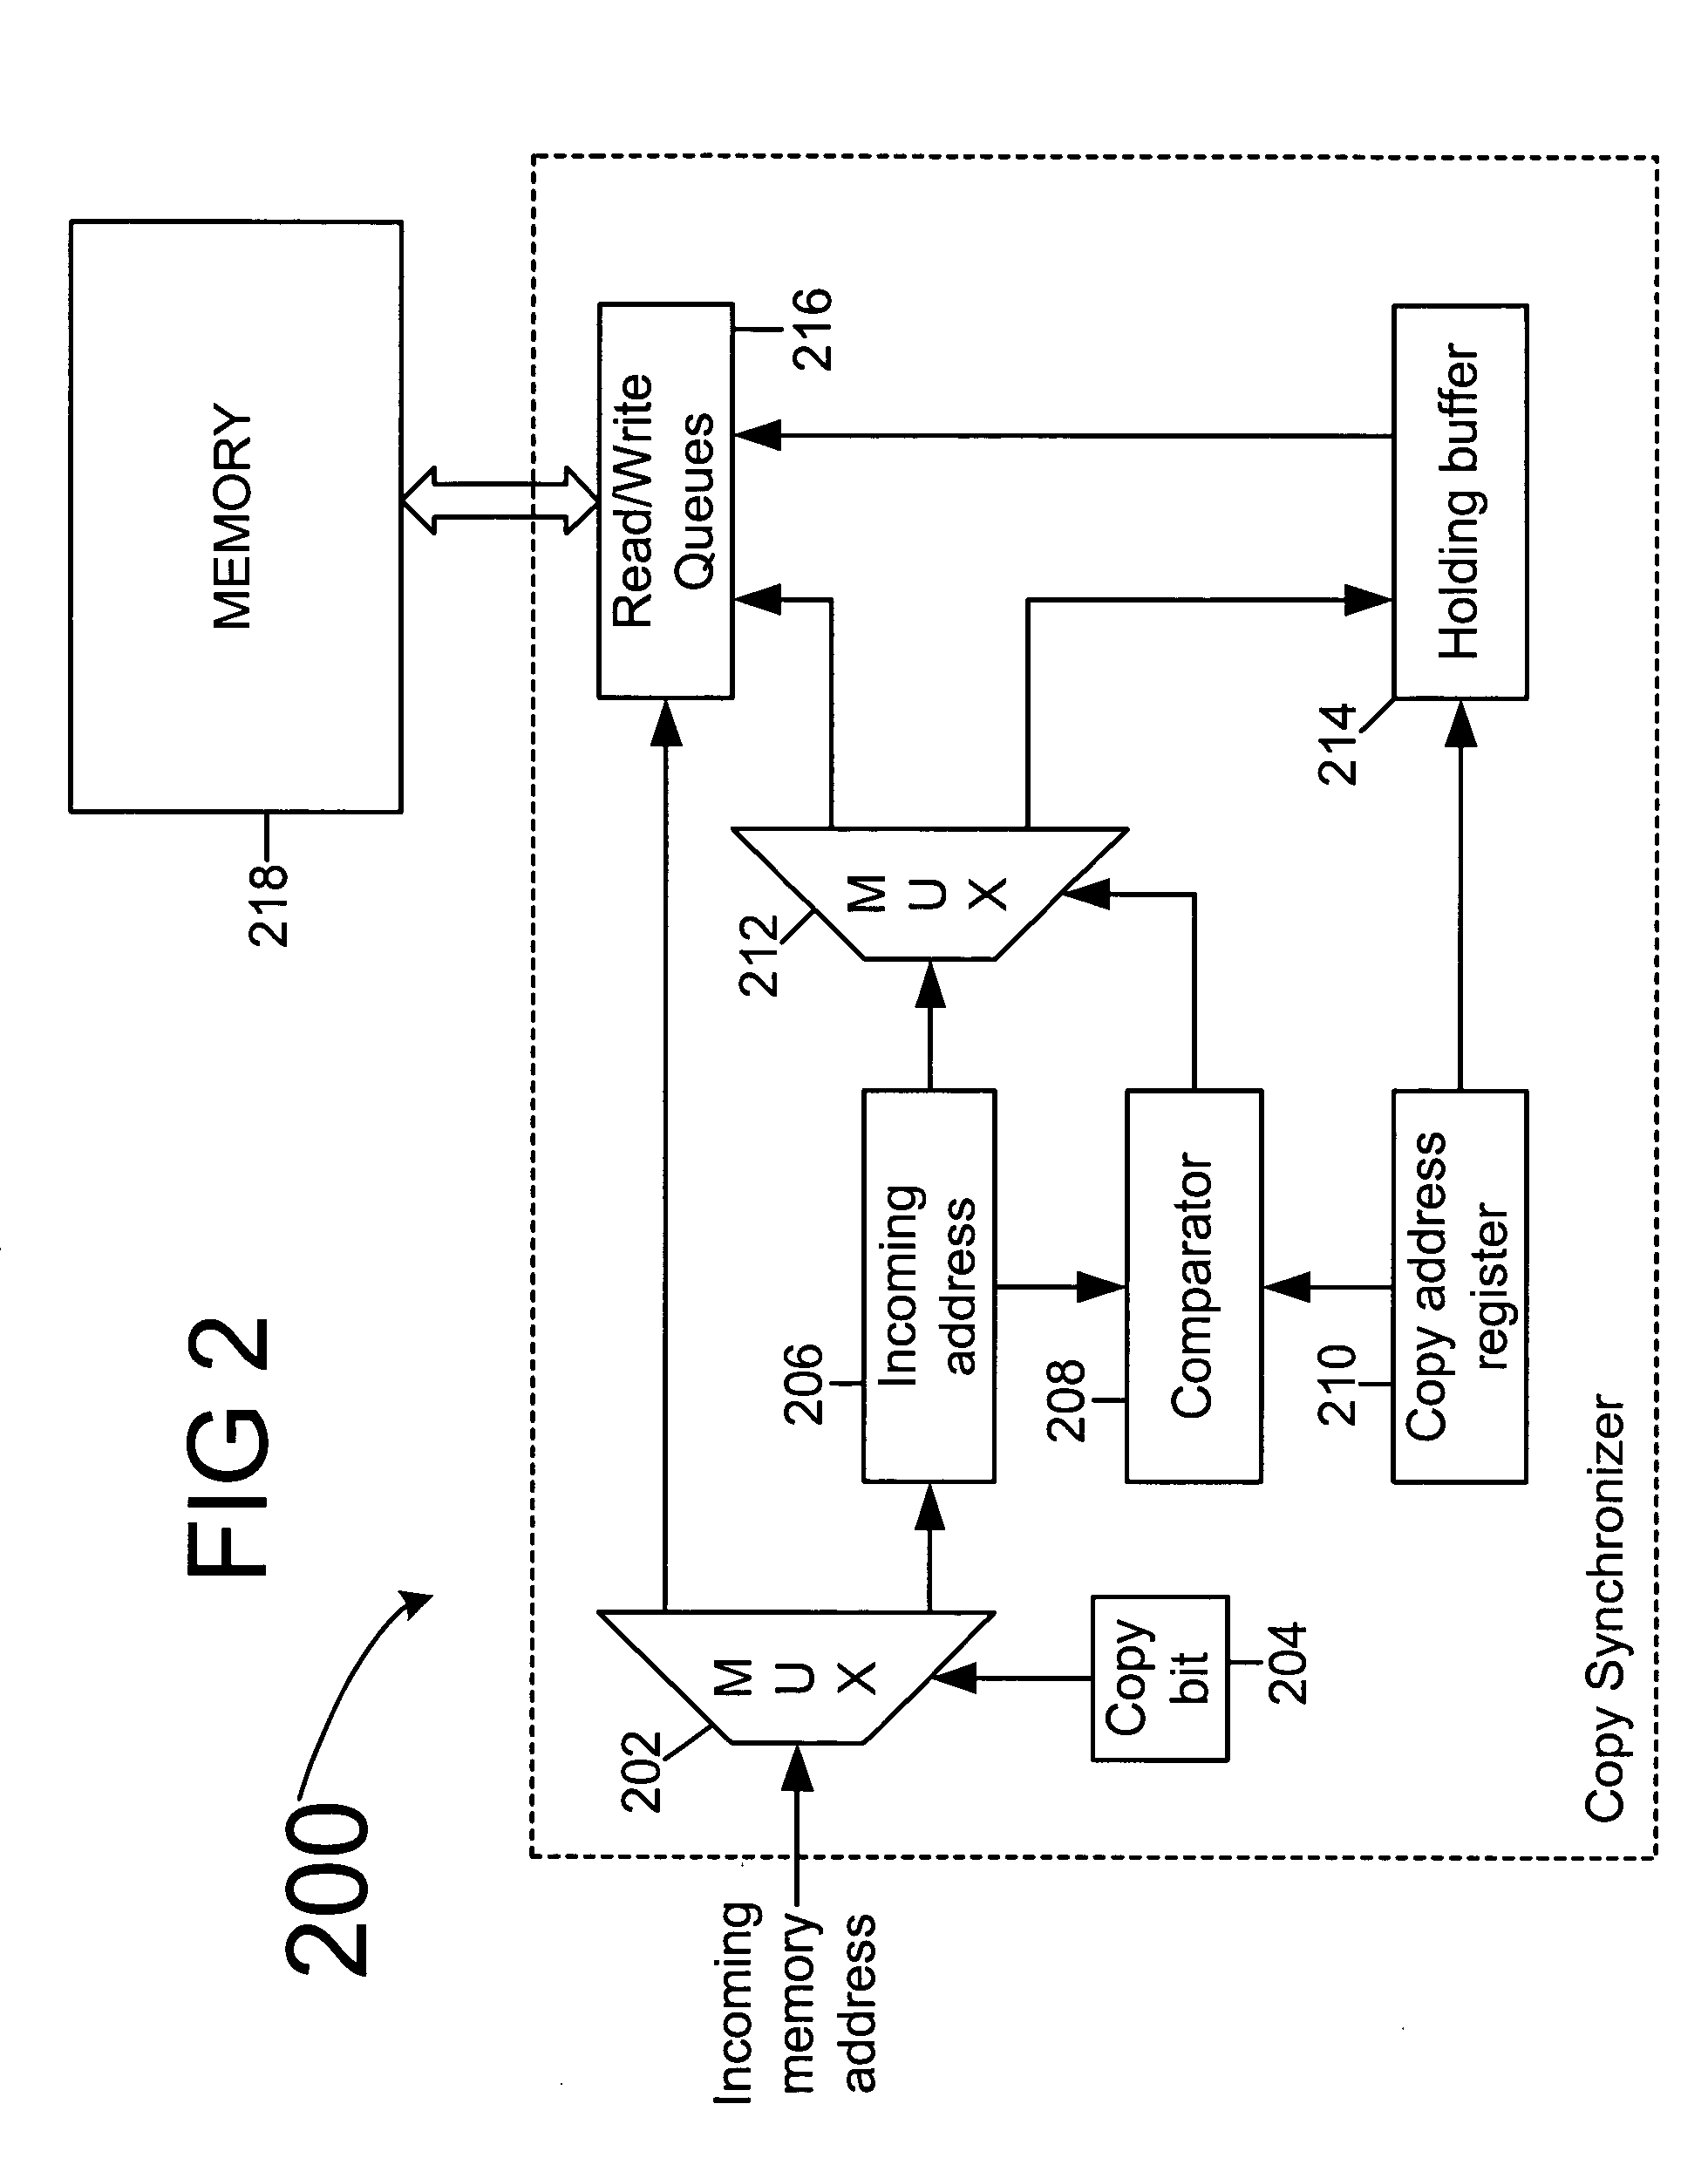 Synchronizing memory copy operations with memory accesses